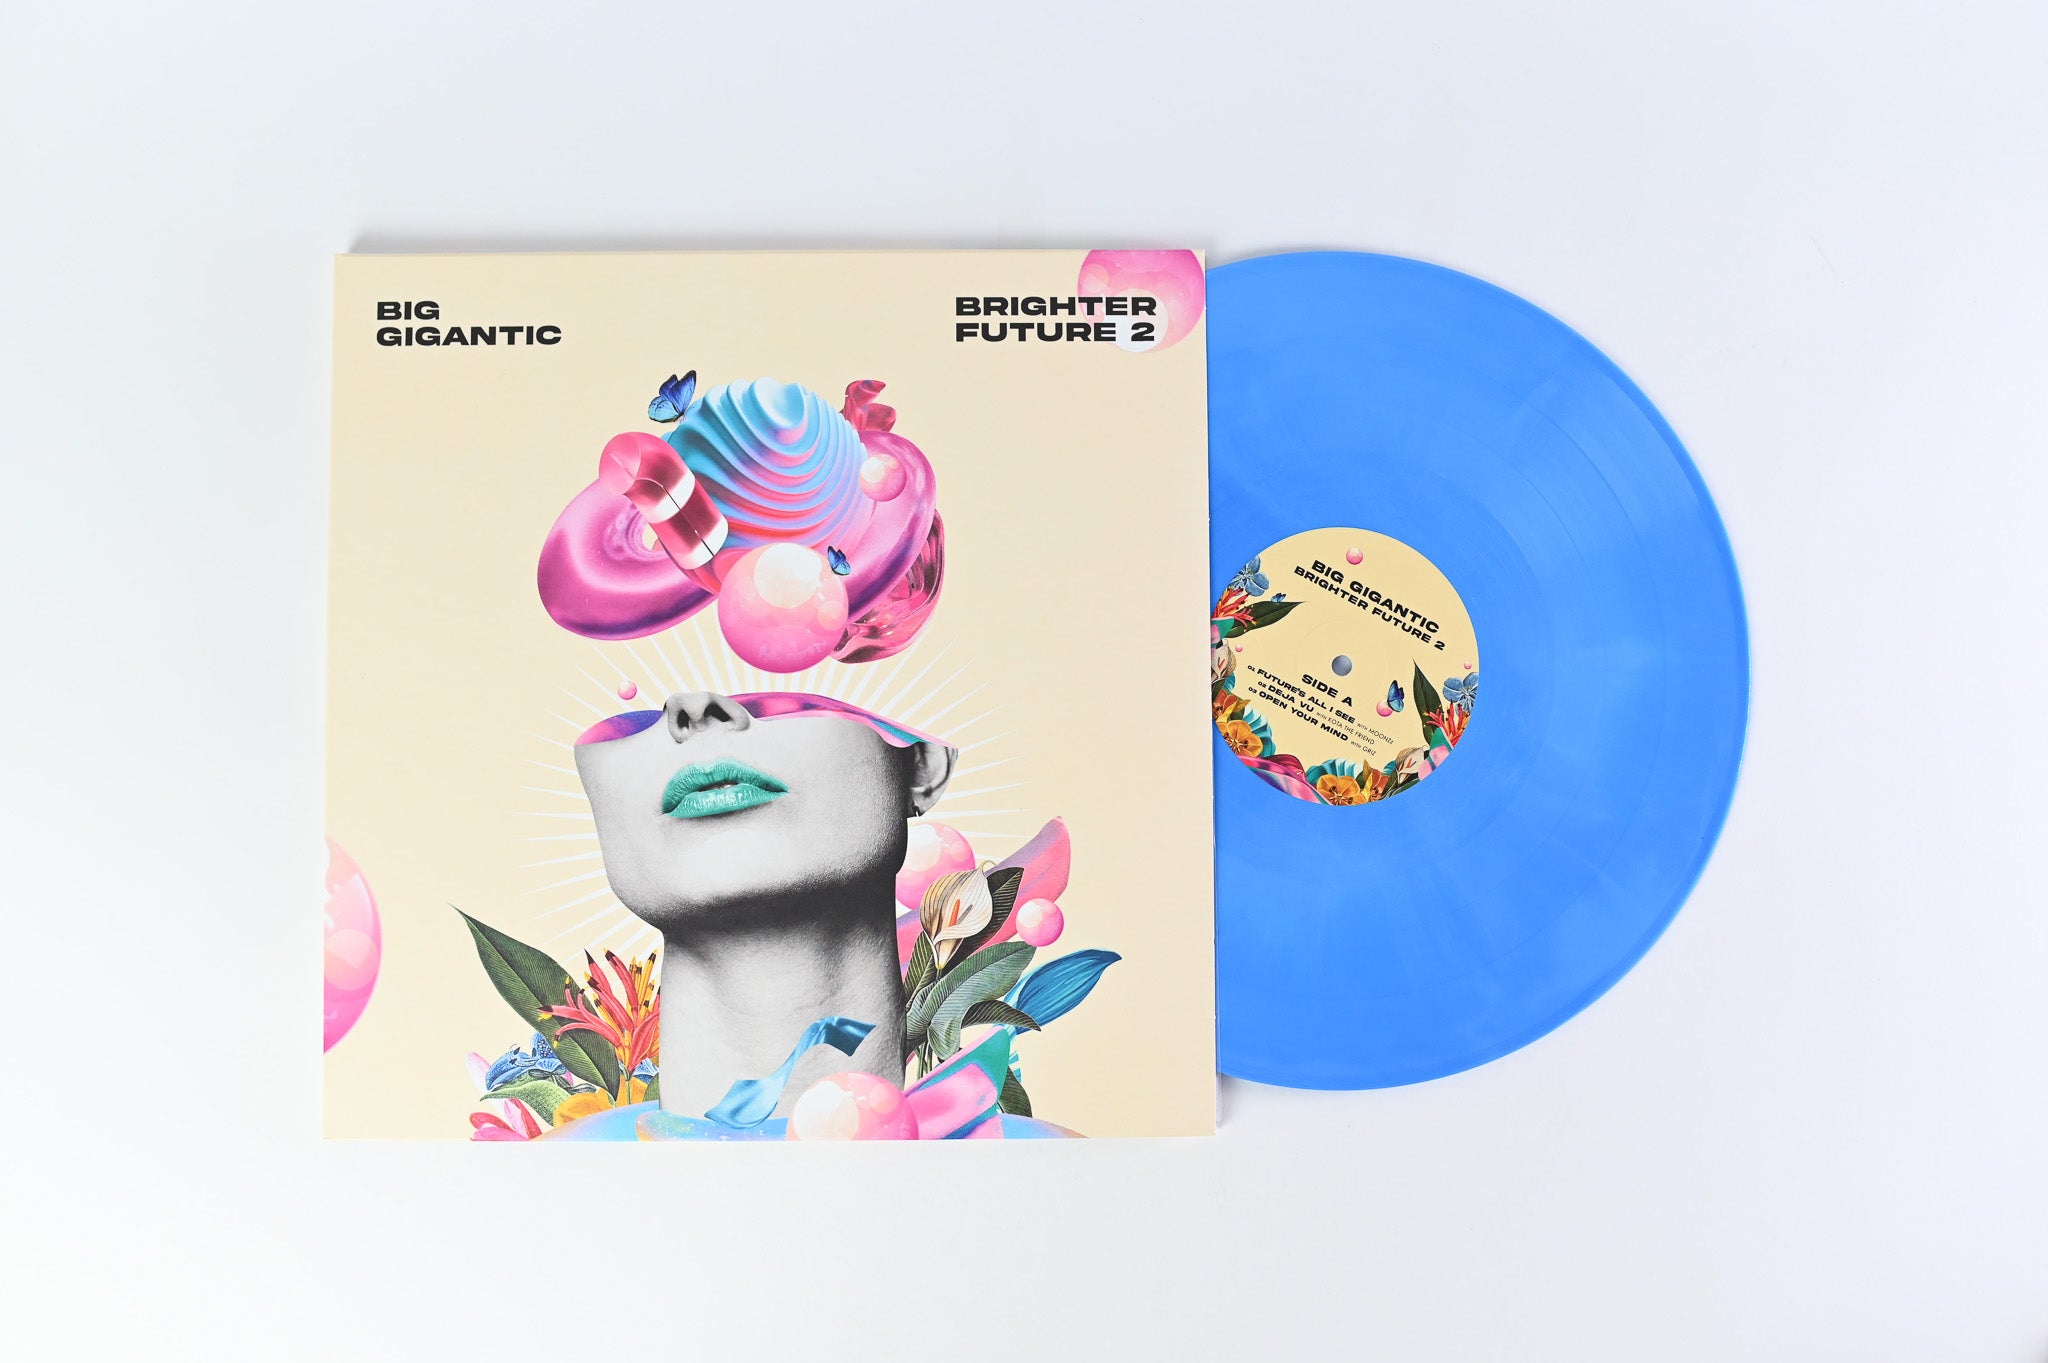 Big Gigantic - Brighter Future 2 Self-Released Limited Edition on Blue Galaxy Vinyl